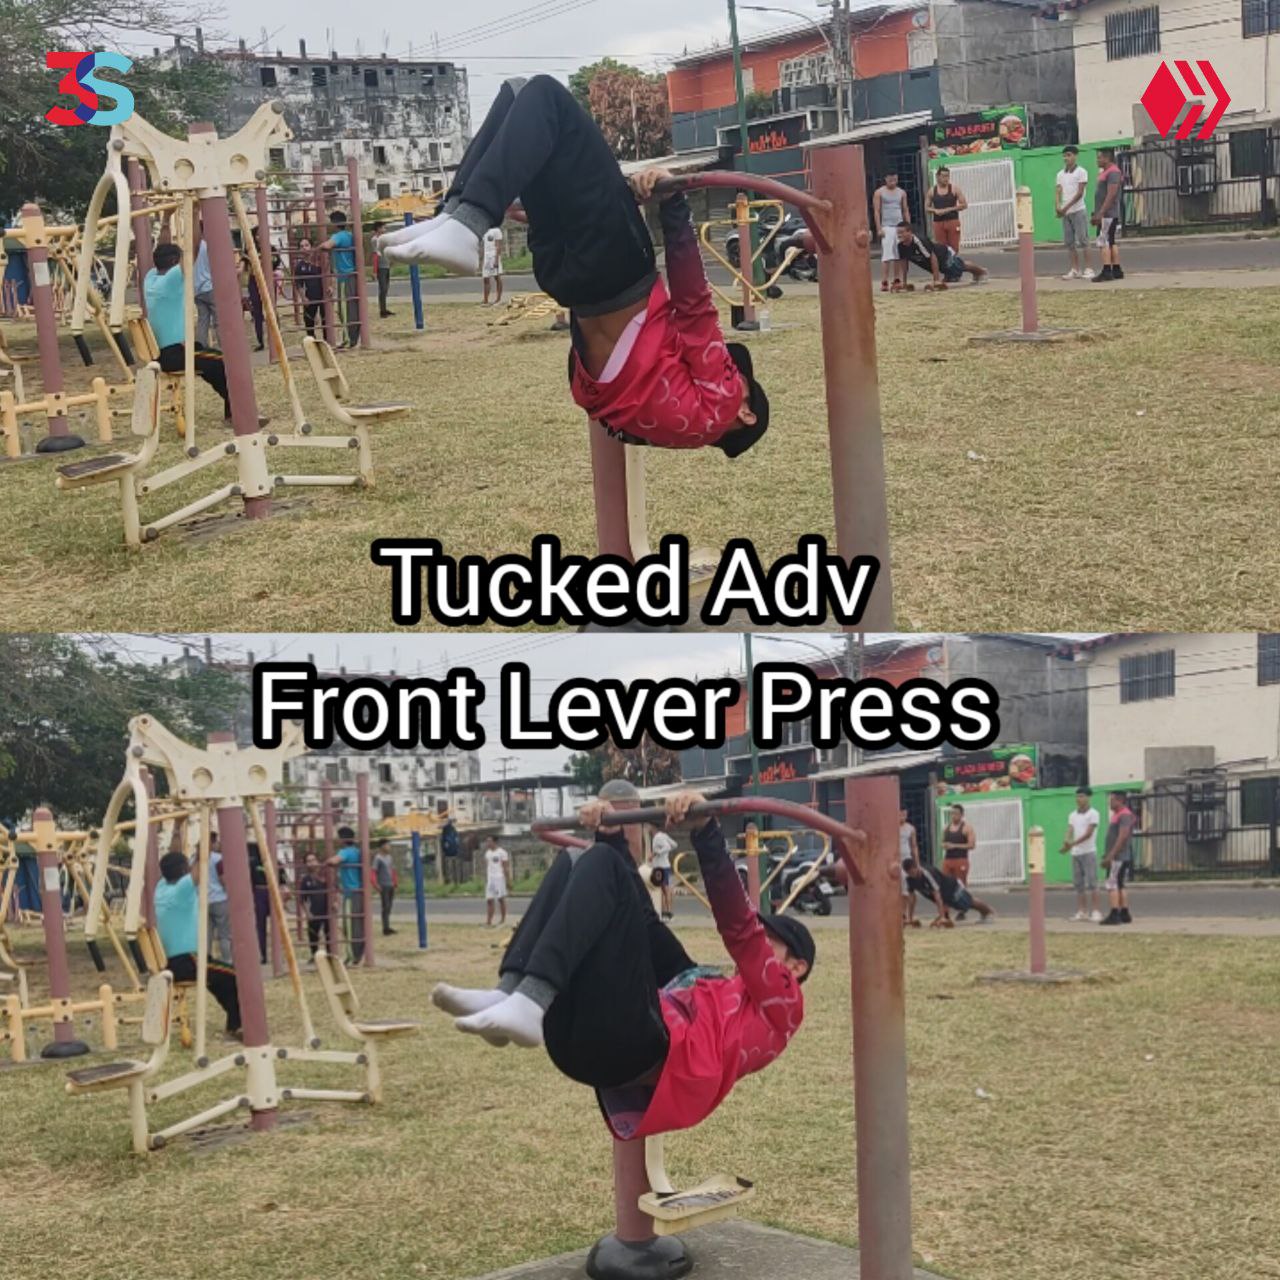 Tucked Adv Front Lever Press.jpg